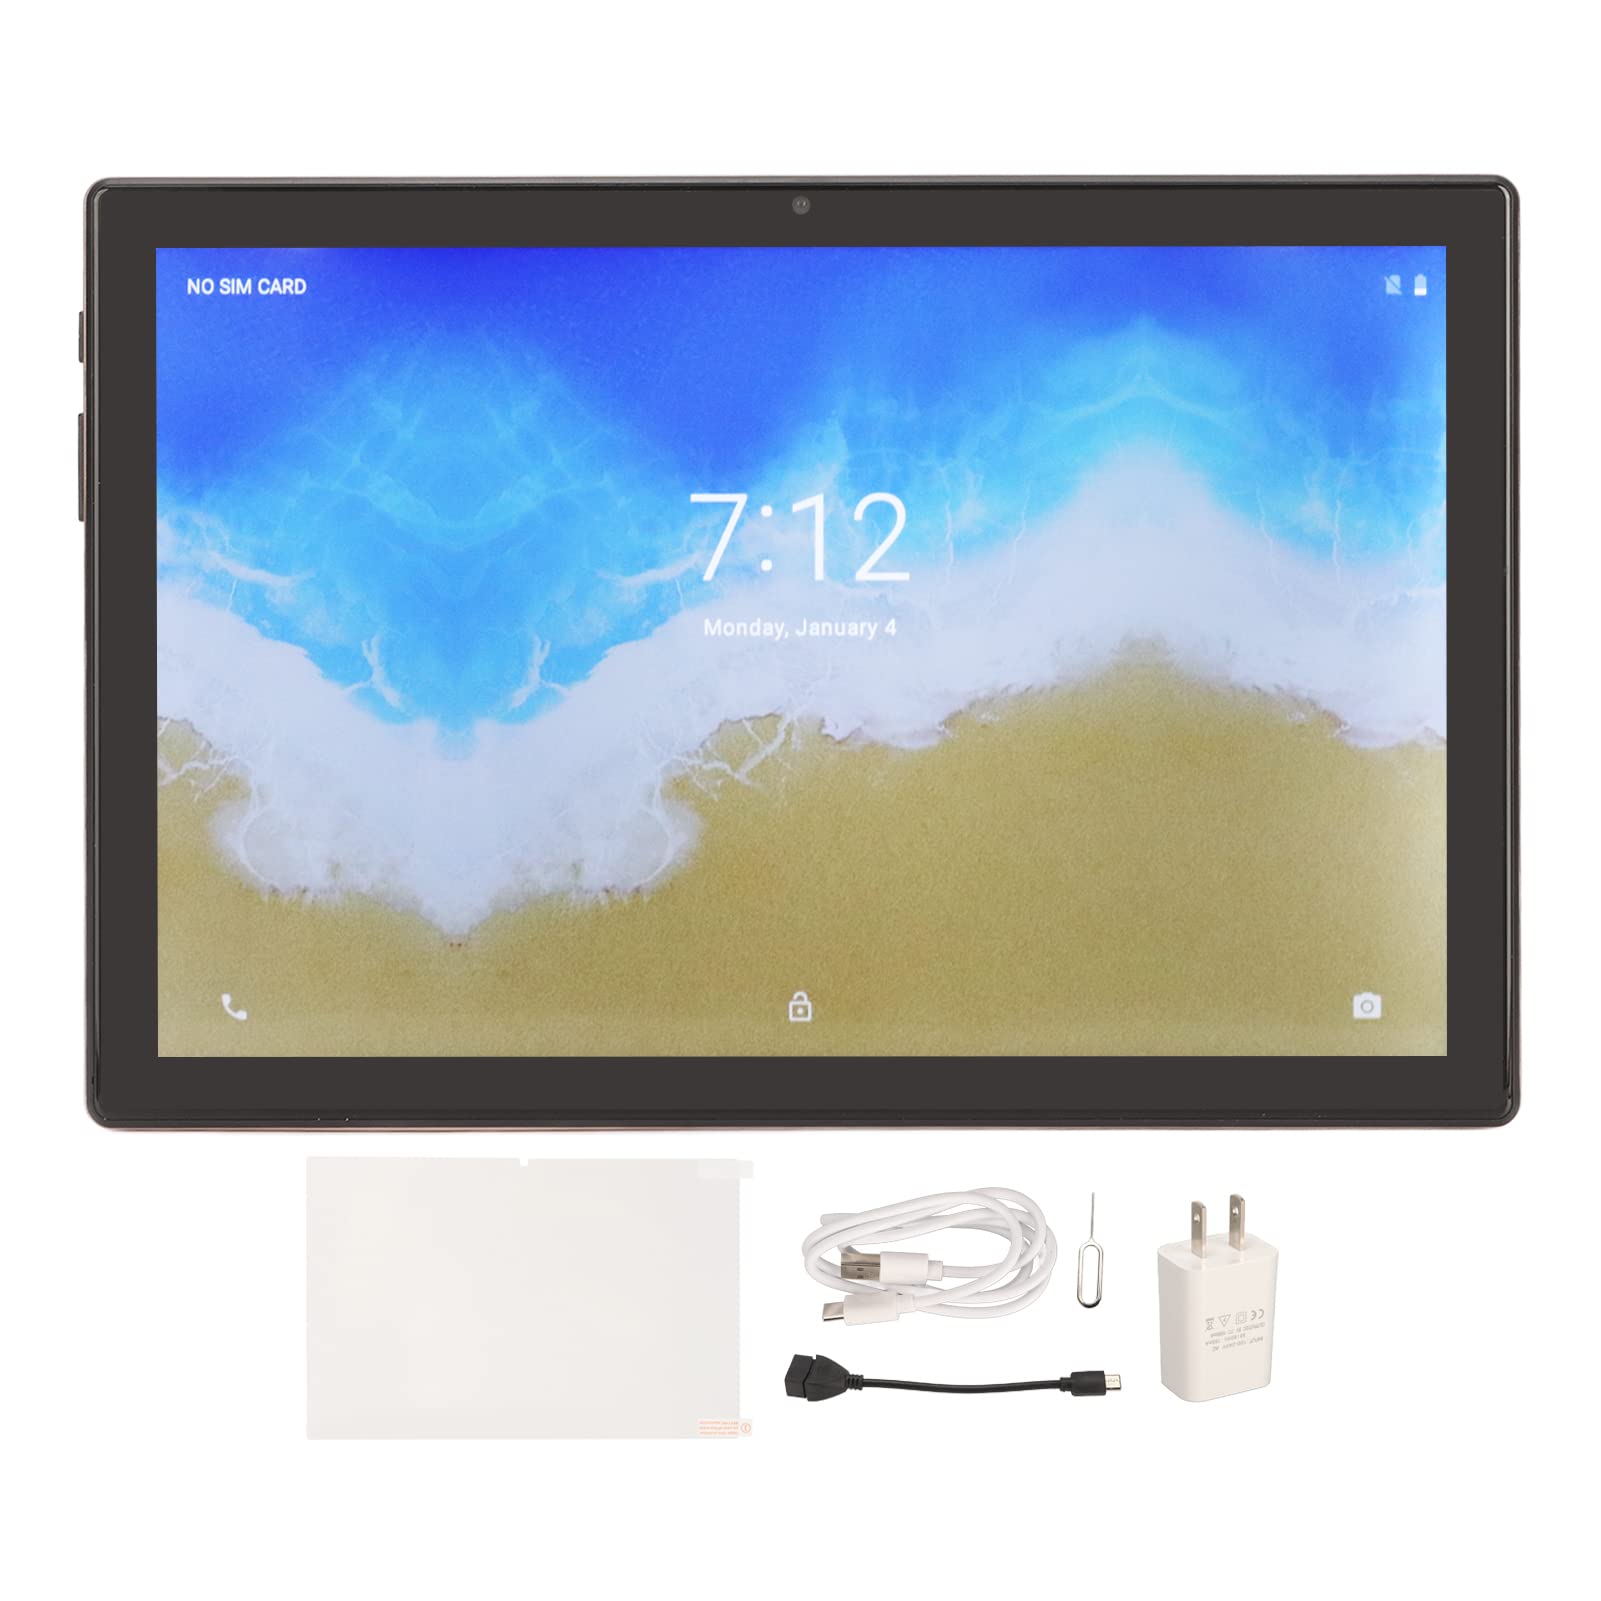 Haofy 10.1 Inch Tablet, 5G WiFi 100-240V Octa Core Tablet for Android 12 for Entertainment (US Plug)